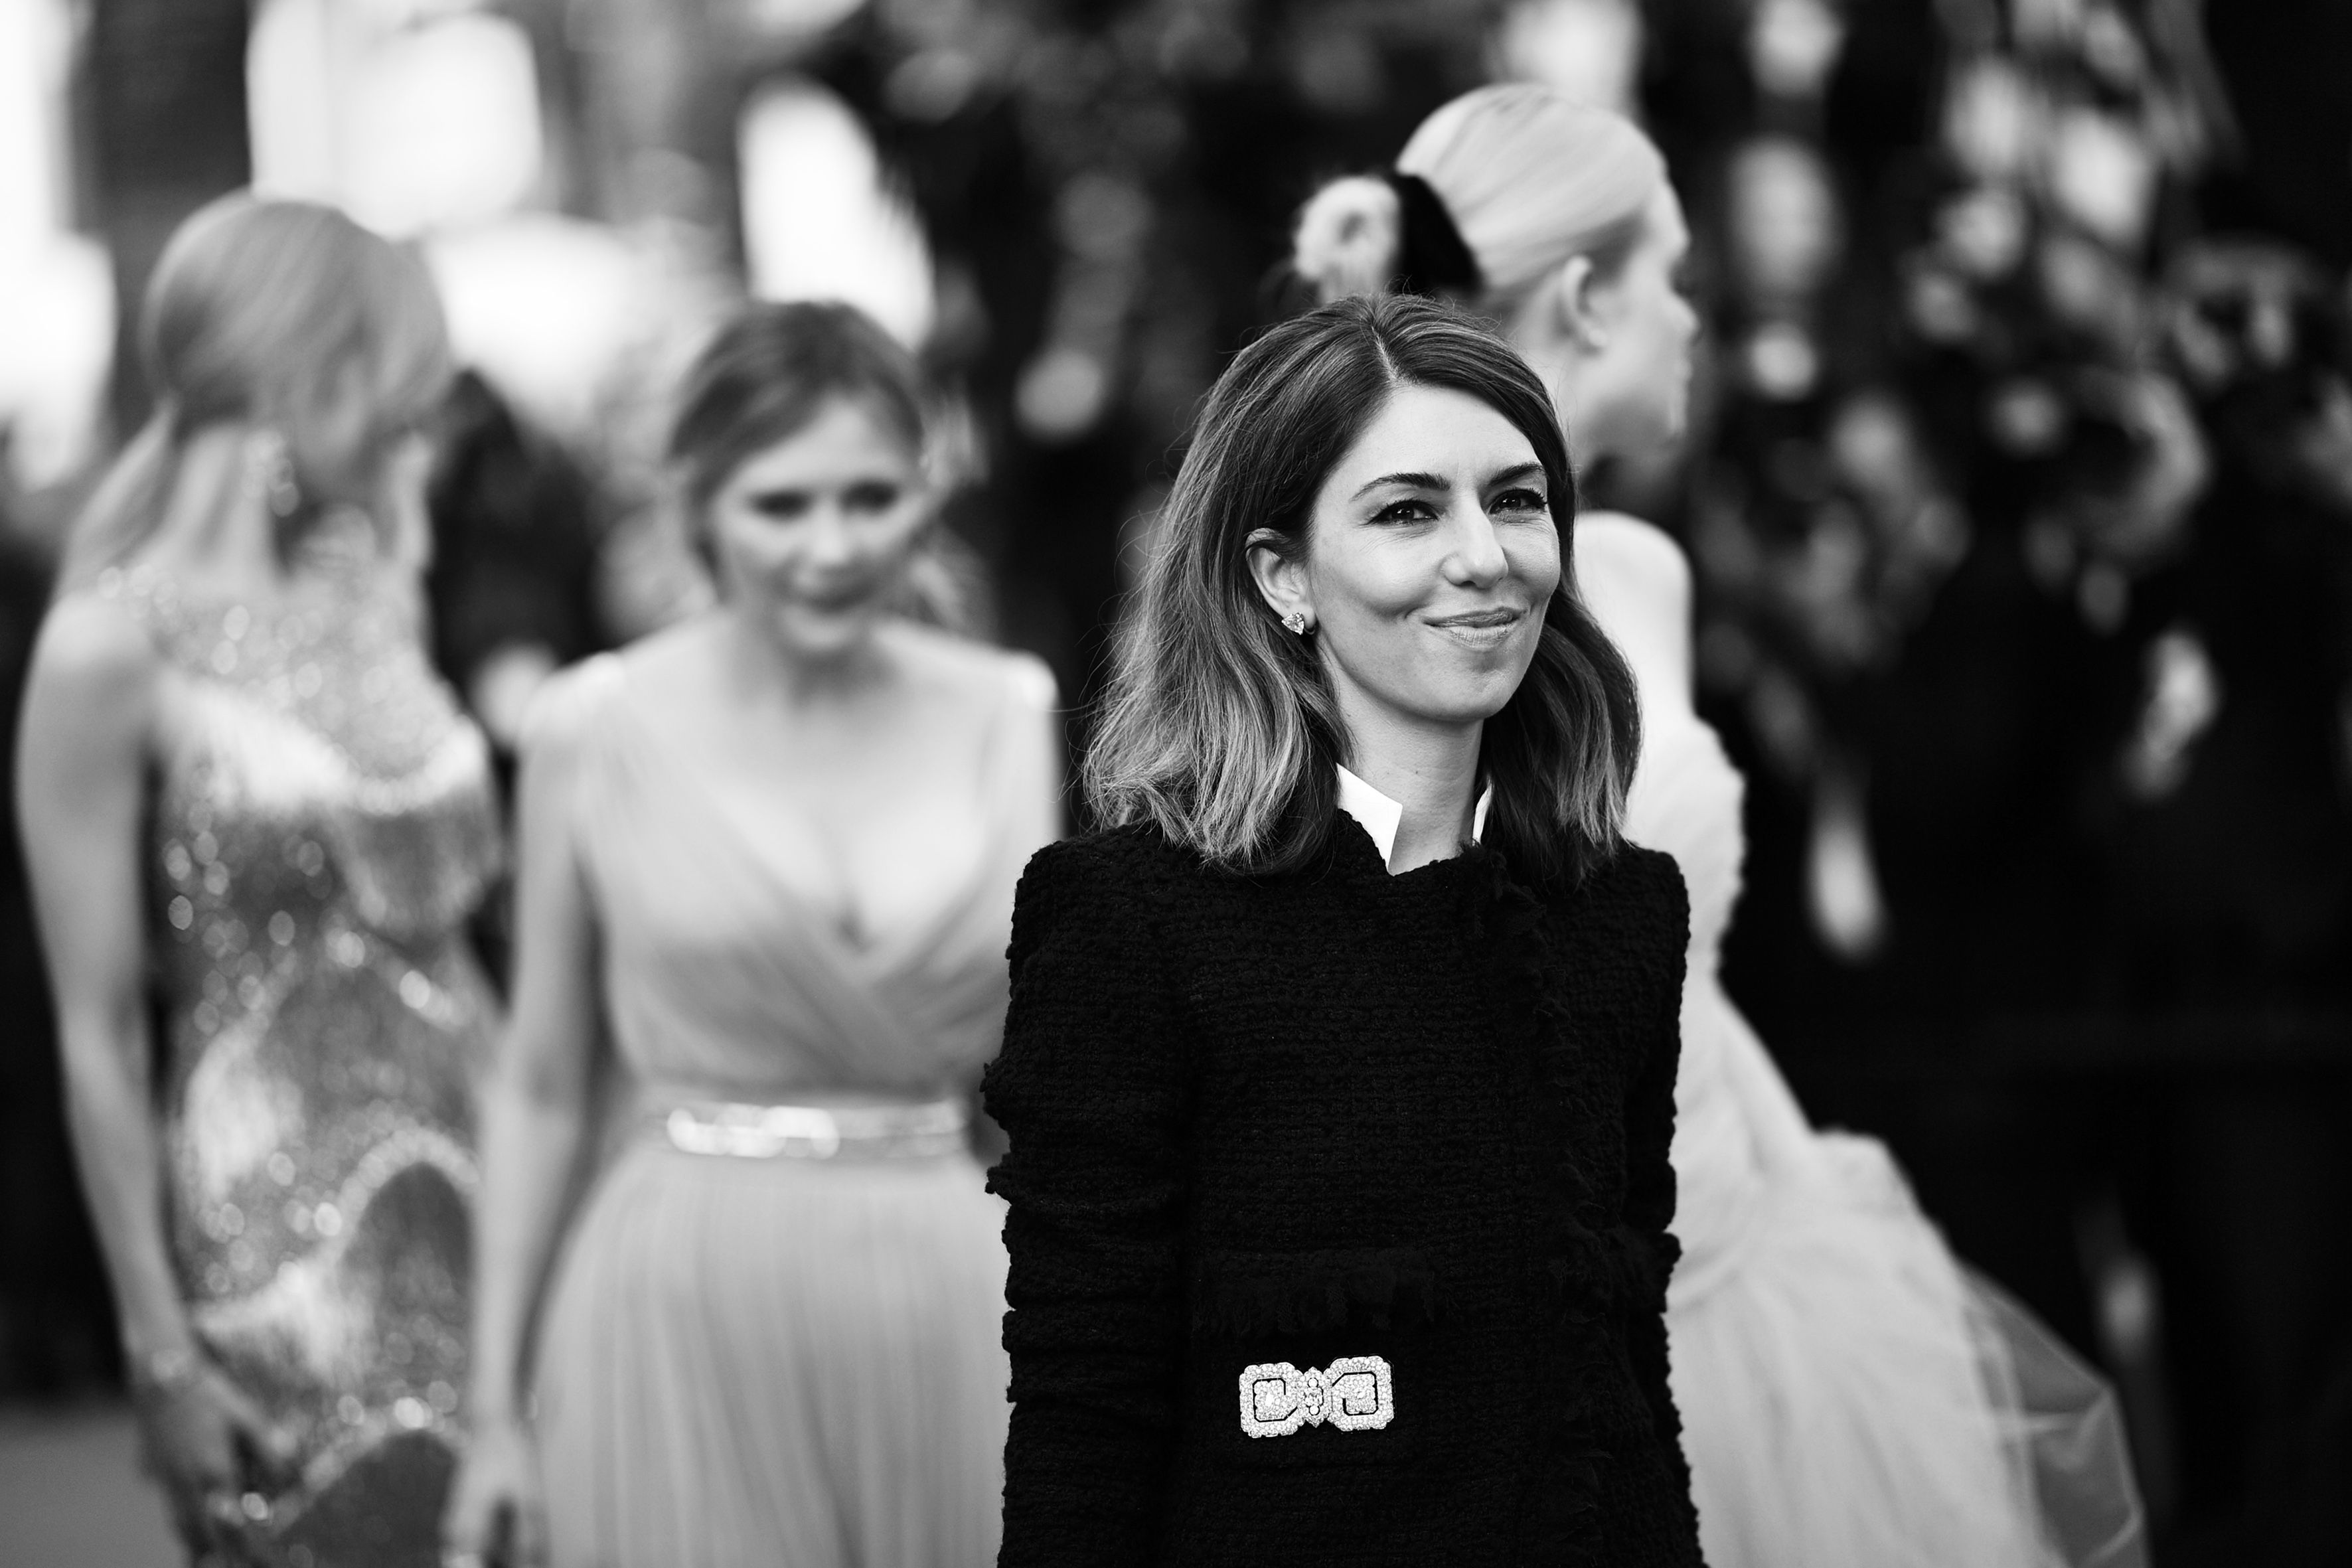 Writer and director Sofia Coppola on family and her films - NZ Herald